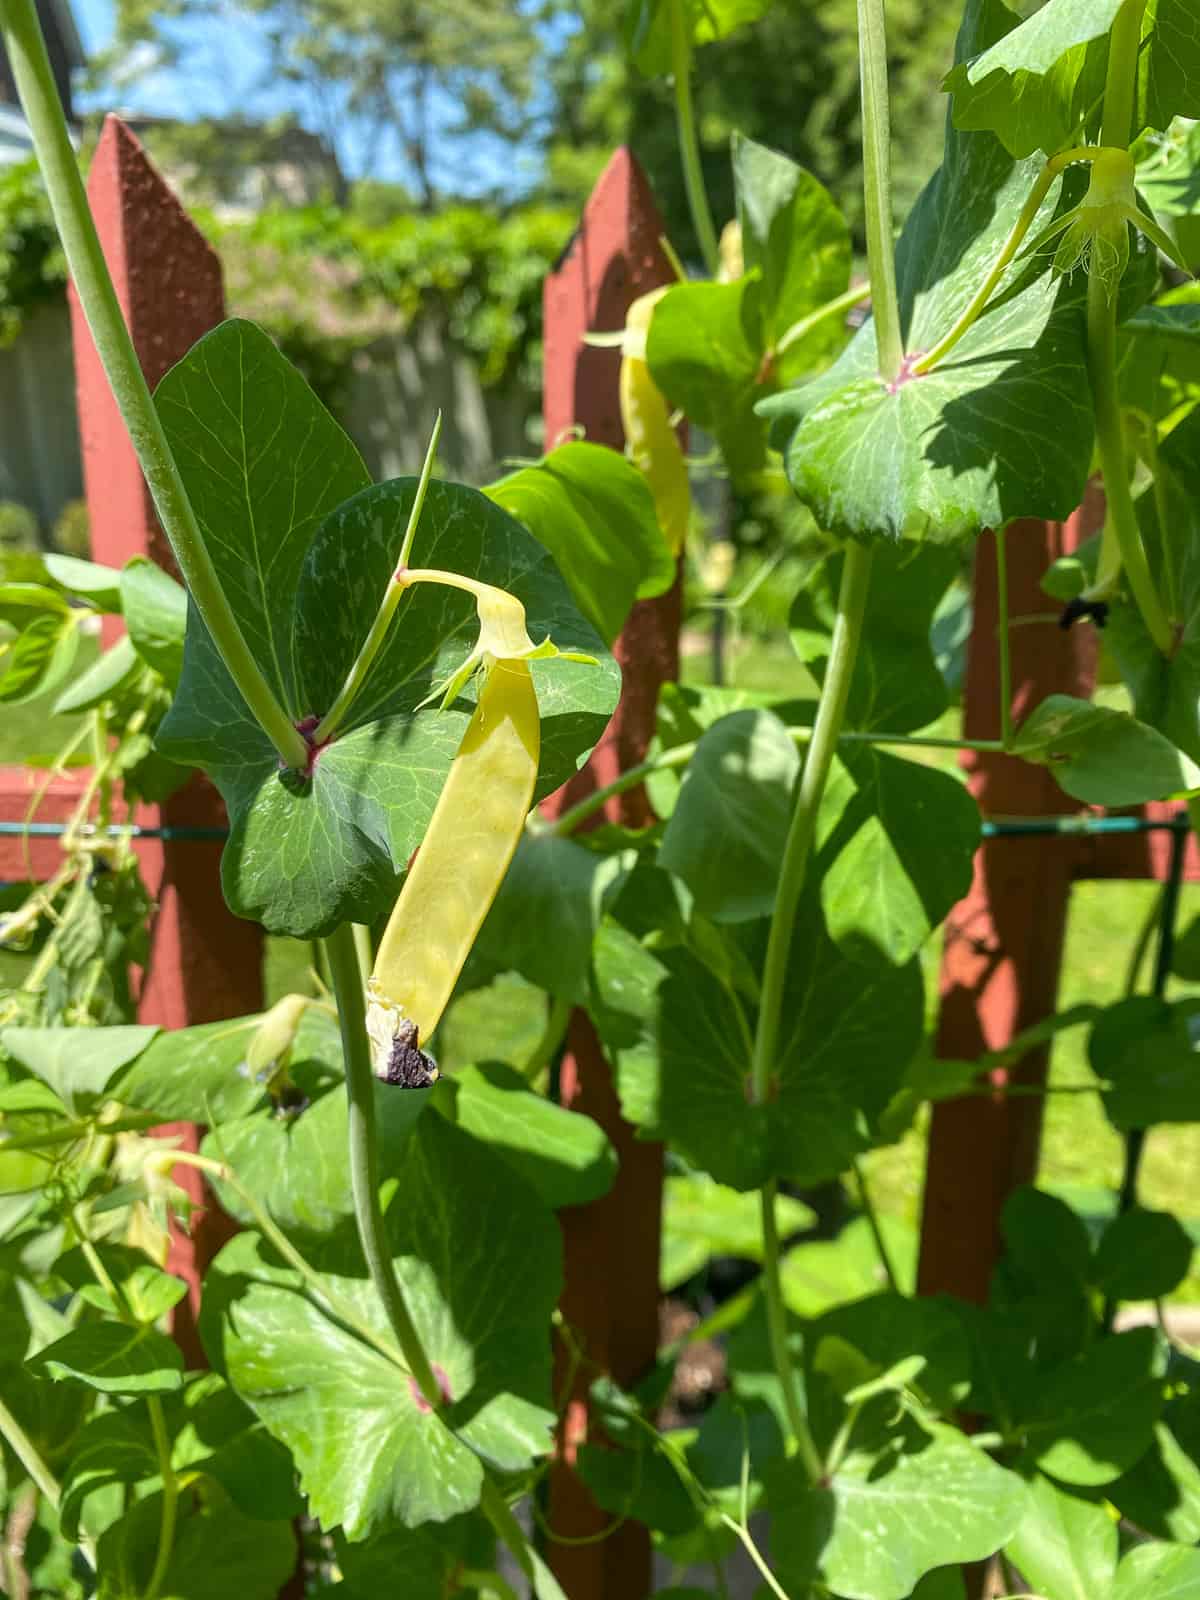 An image of a golden snow pea plant using a fence as a trellis.